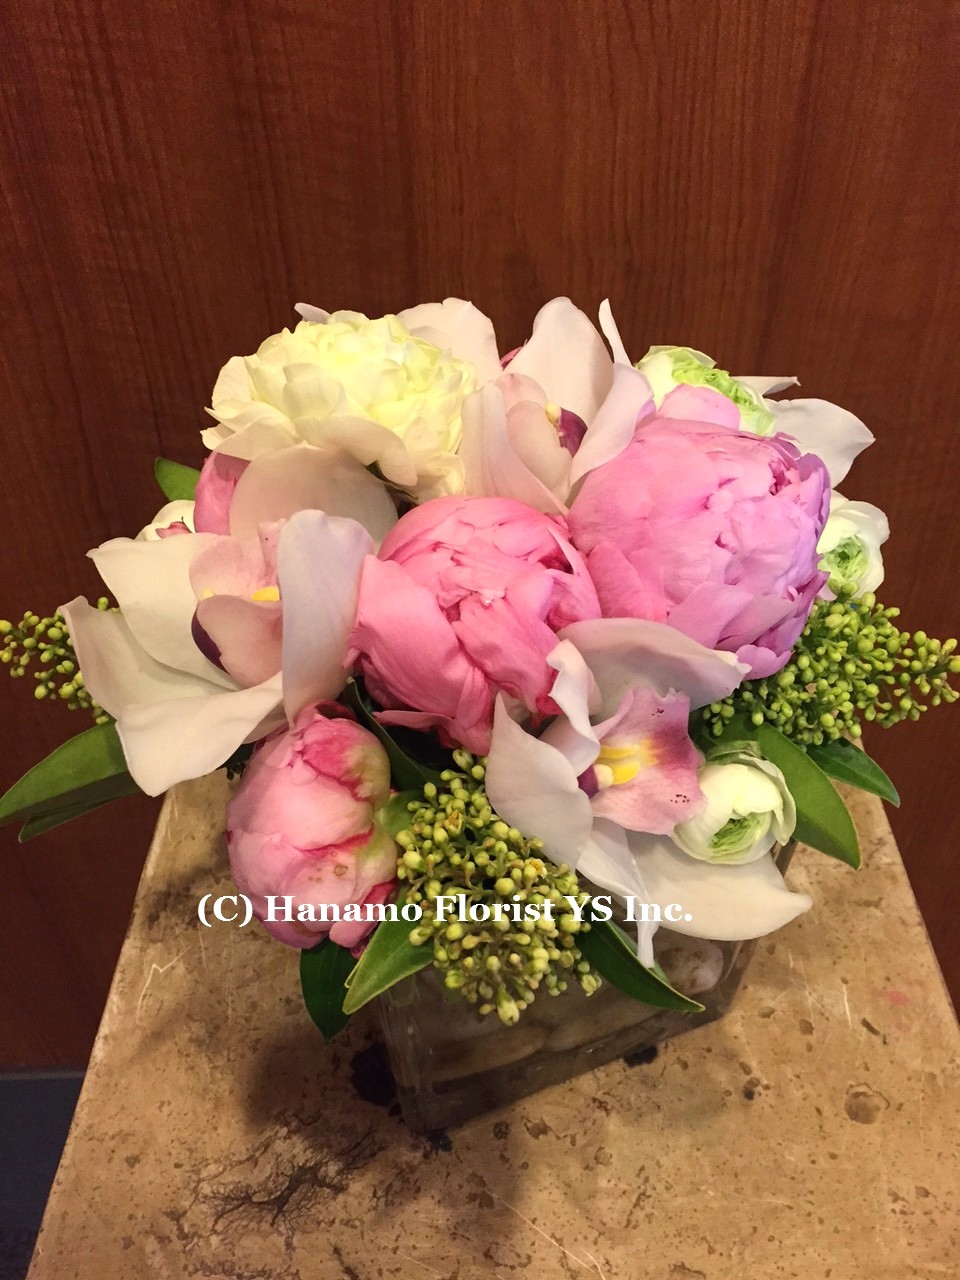 CUBE405 Peonies, Cymbidiums & More in a 5" glass Cube